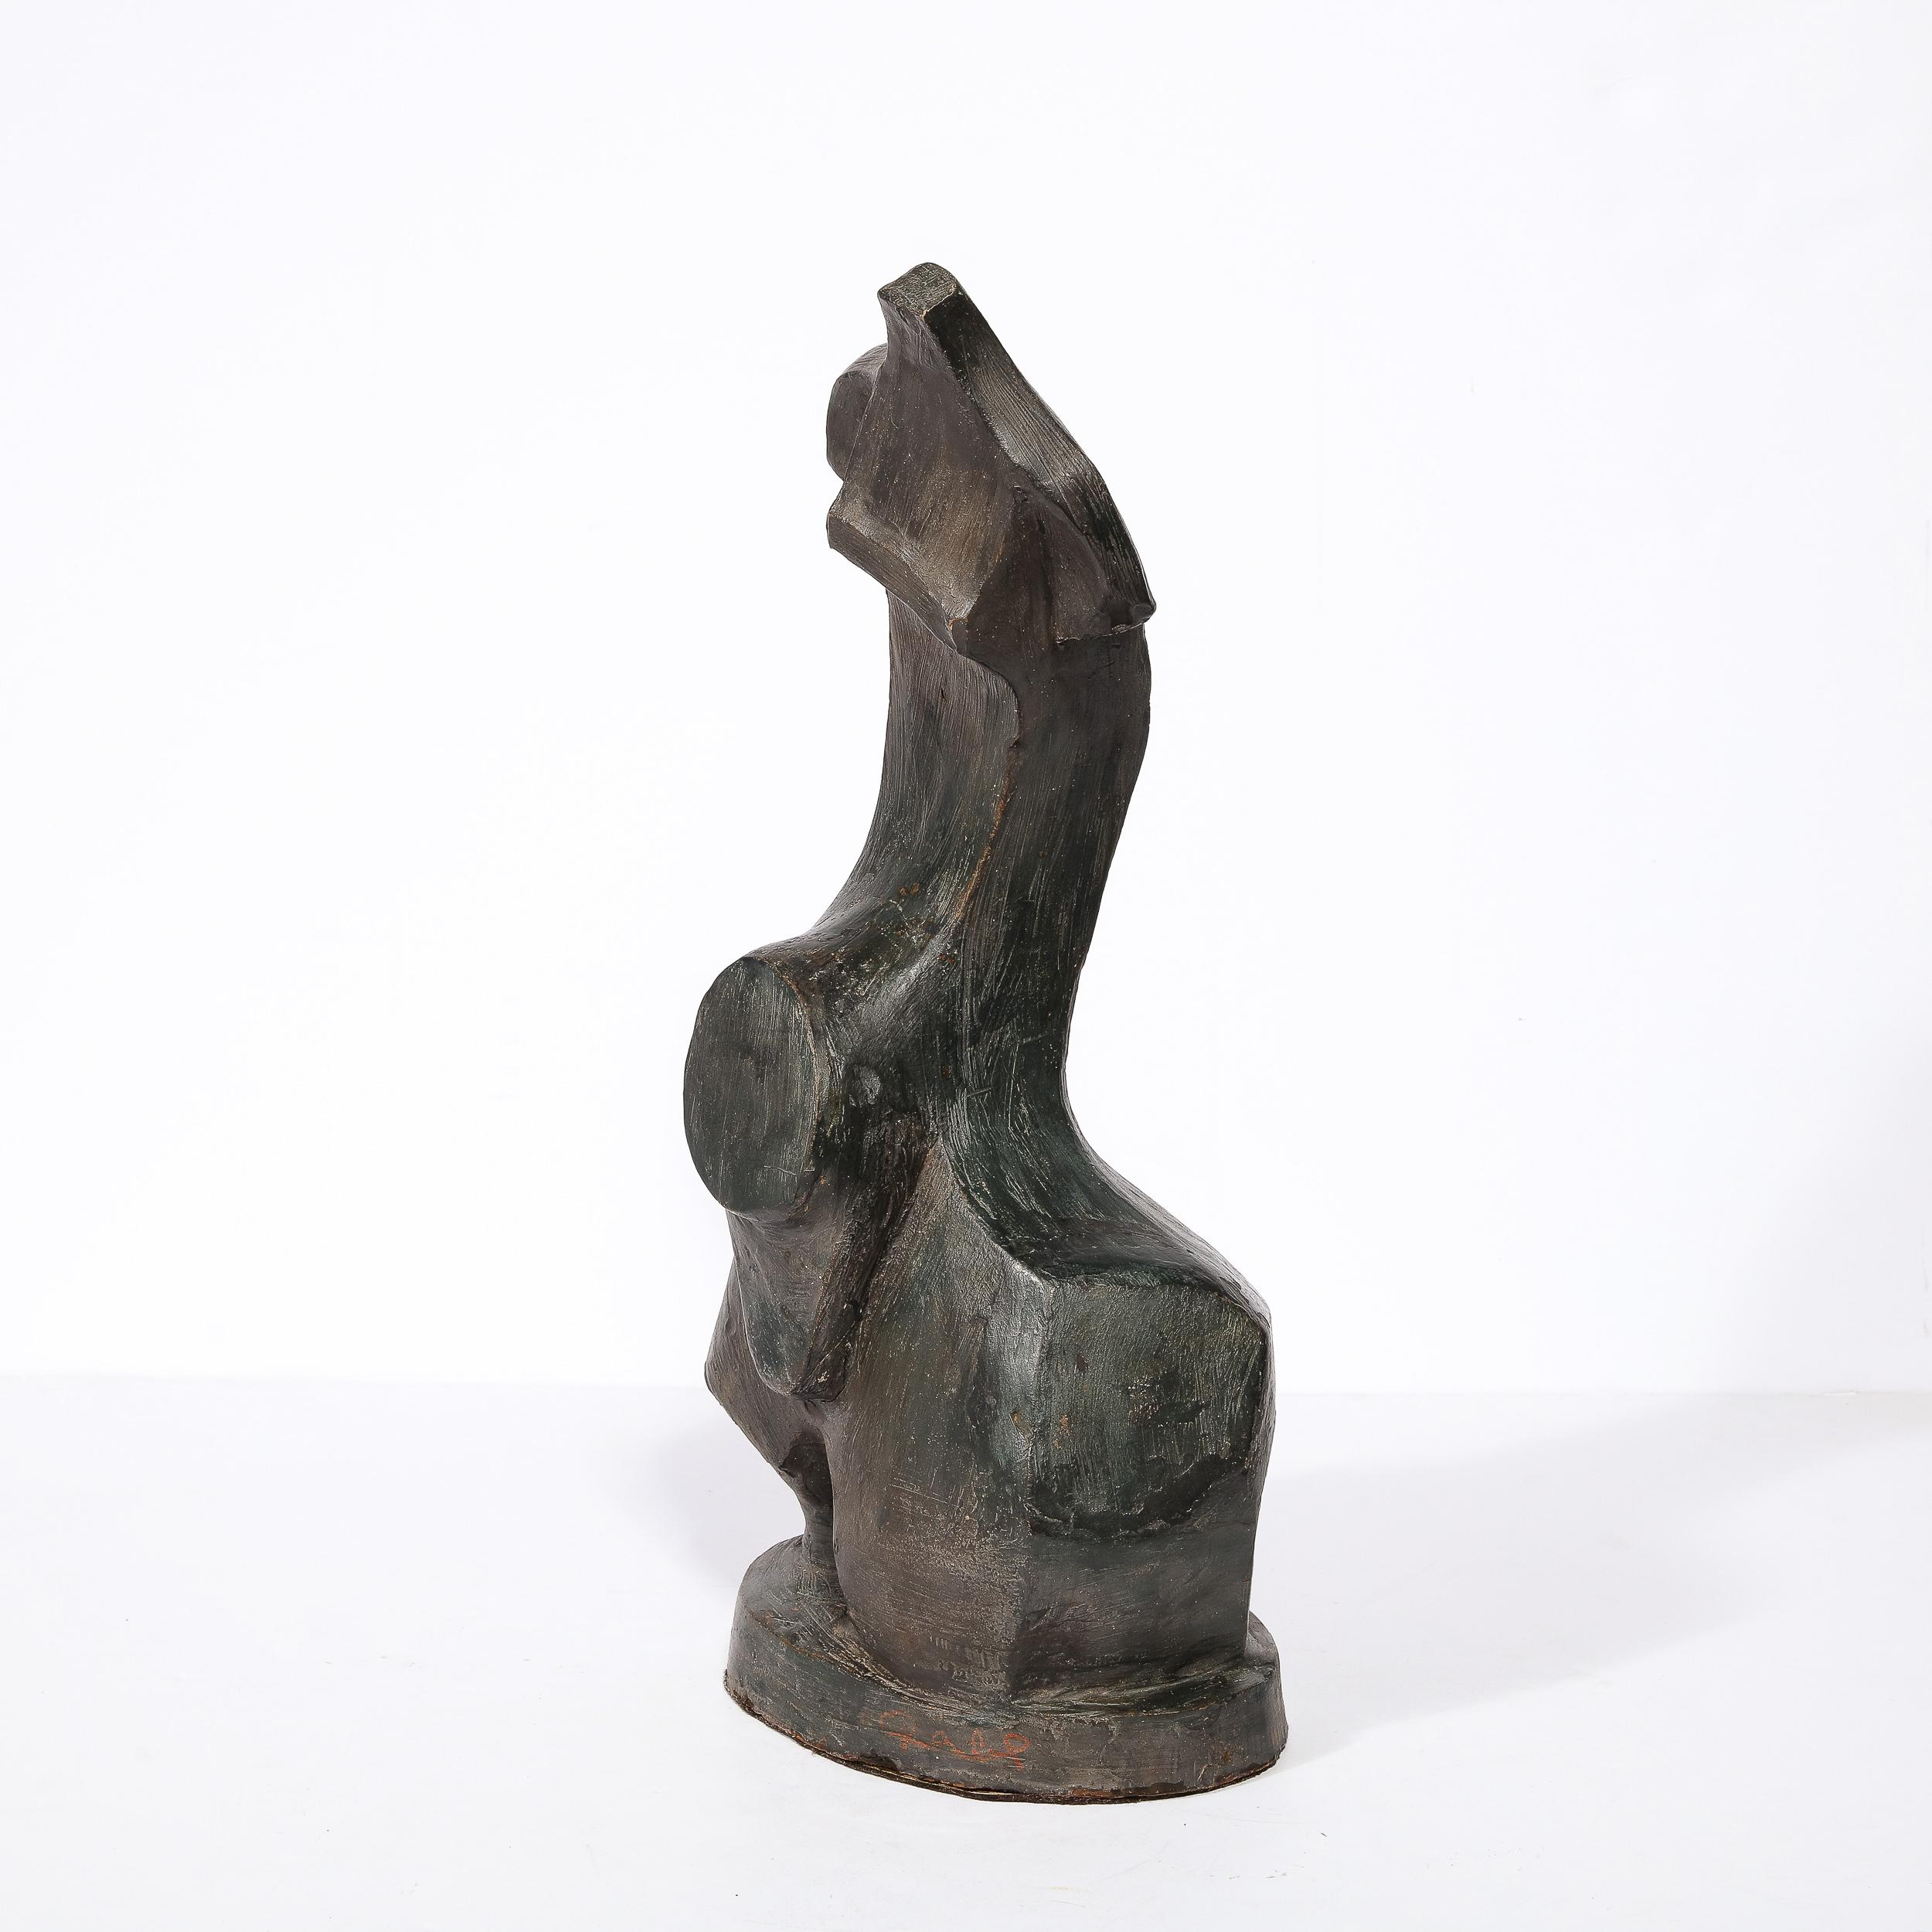 This sophisticated and alluring Mid-Century Modern Sculpture was realized in France circa 1950. Executed in terra cotta with a oil rubbed bronze colored glaze, the work presents an abstract and dynamic form- bristling with verve. An elongated form